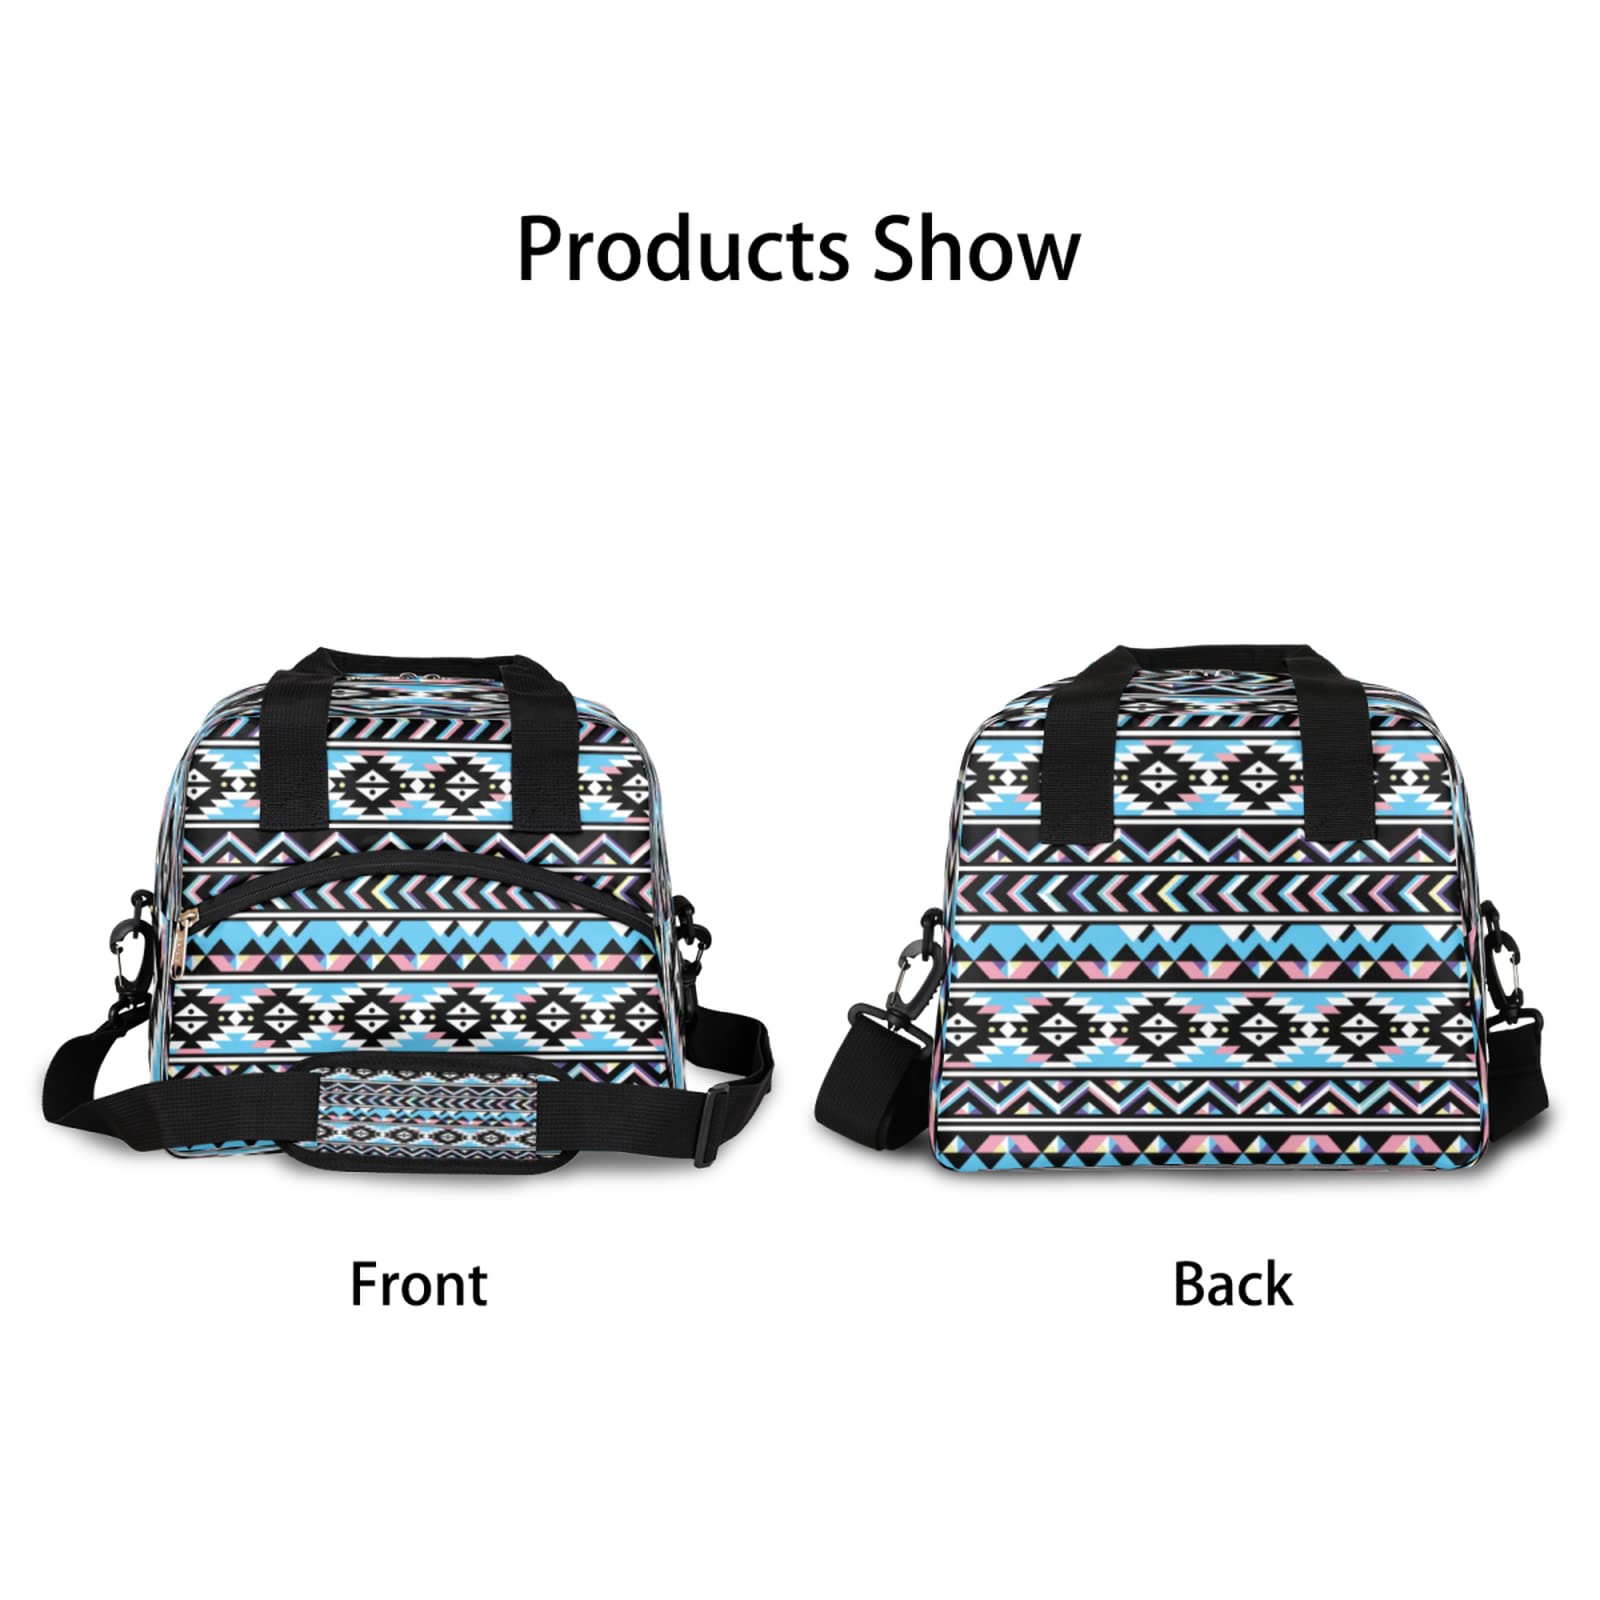 Aztec Geometric Pattern Lunch Bag Adjustable Shoulder Strap Cooler Bag Reusable Zipper Insulated Lunch Tote Bag for Work Picnic Camping School